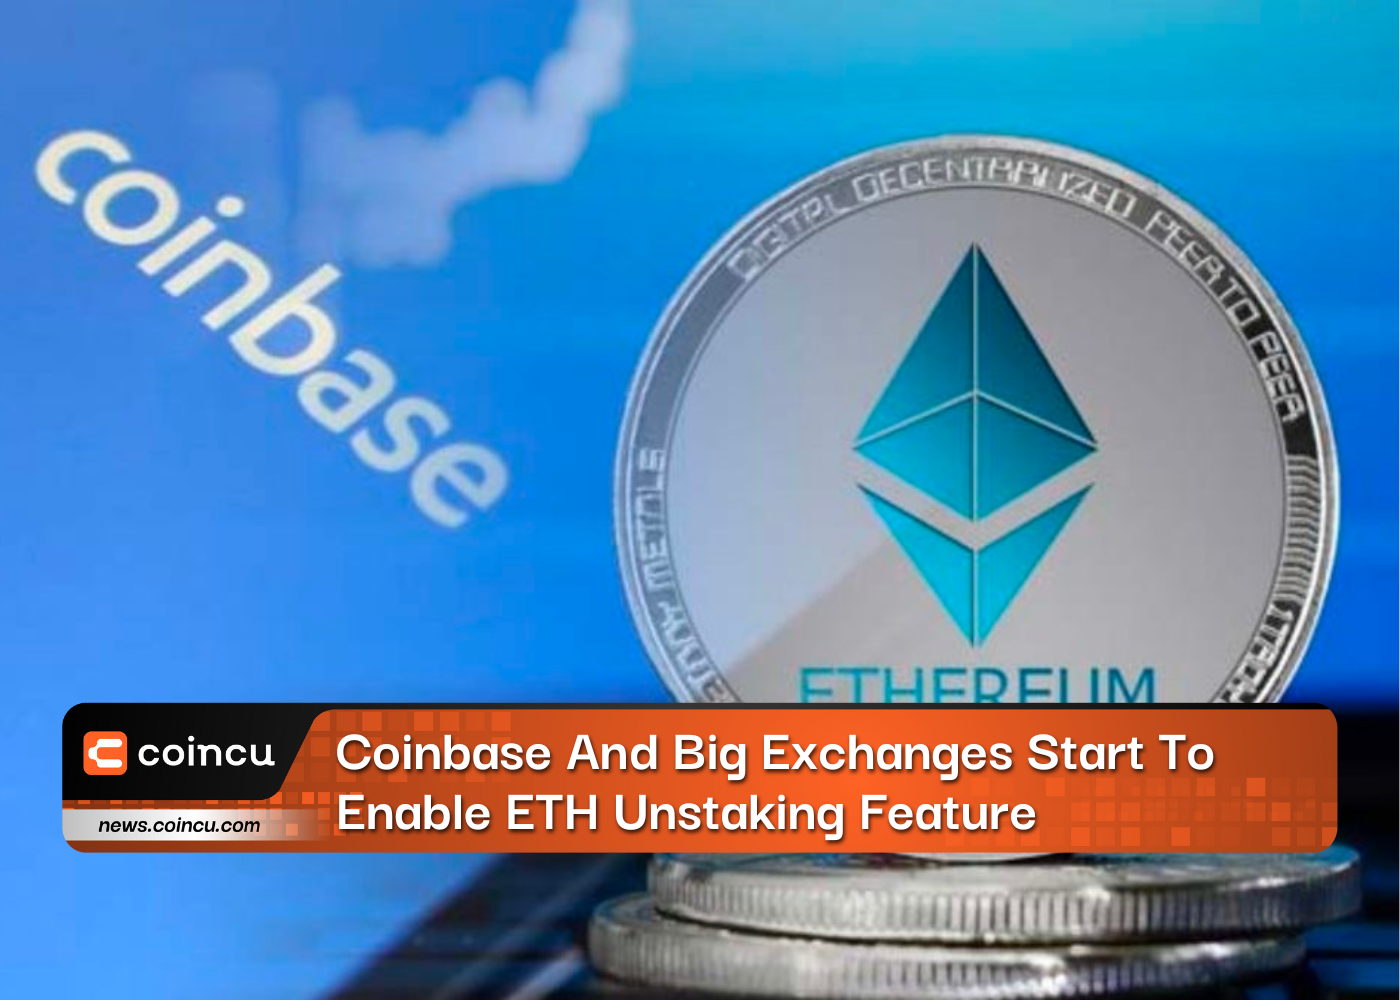 Coinbase And Big Exchanges Start To Enable ETH Unstaking Feature